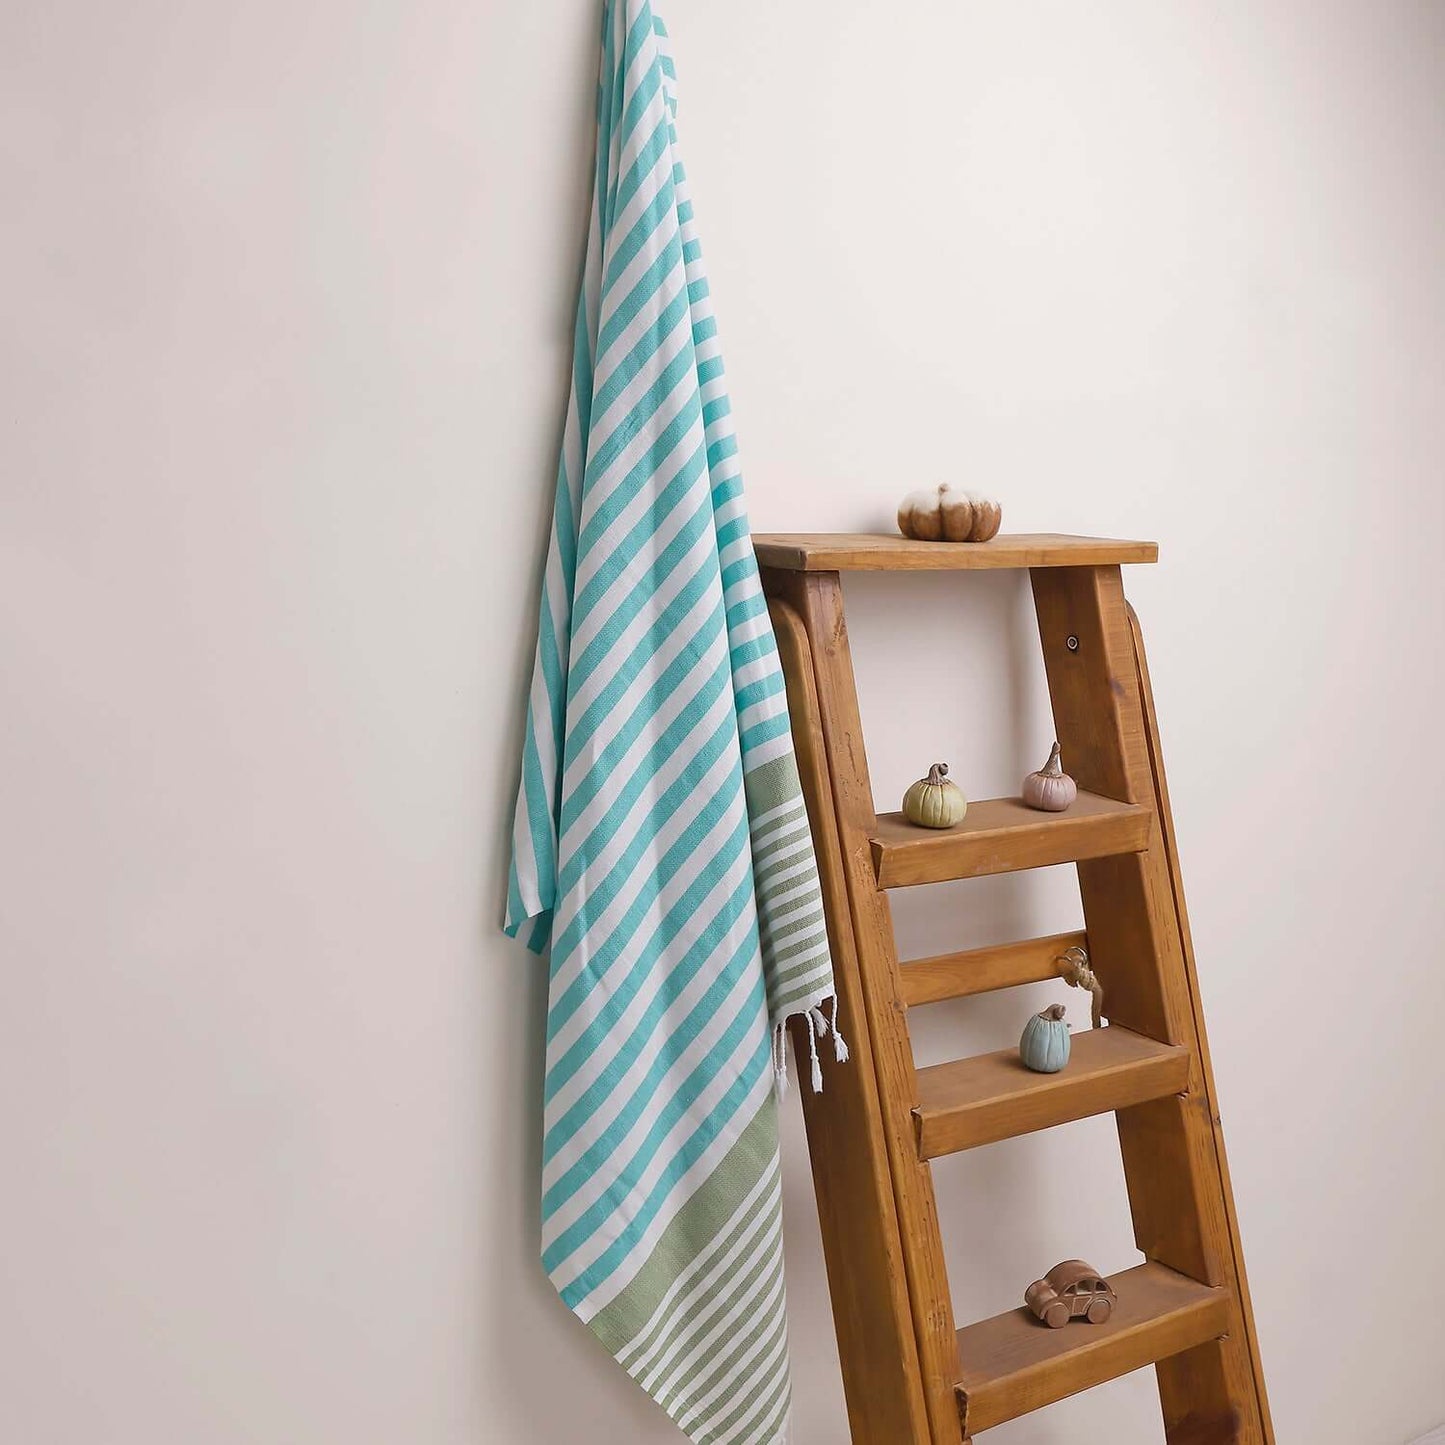  Loom Legacy turquoise and green striped beach towel with tassels, draped over a wooden ladder beside small decorative items on the shelves.